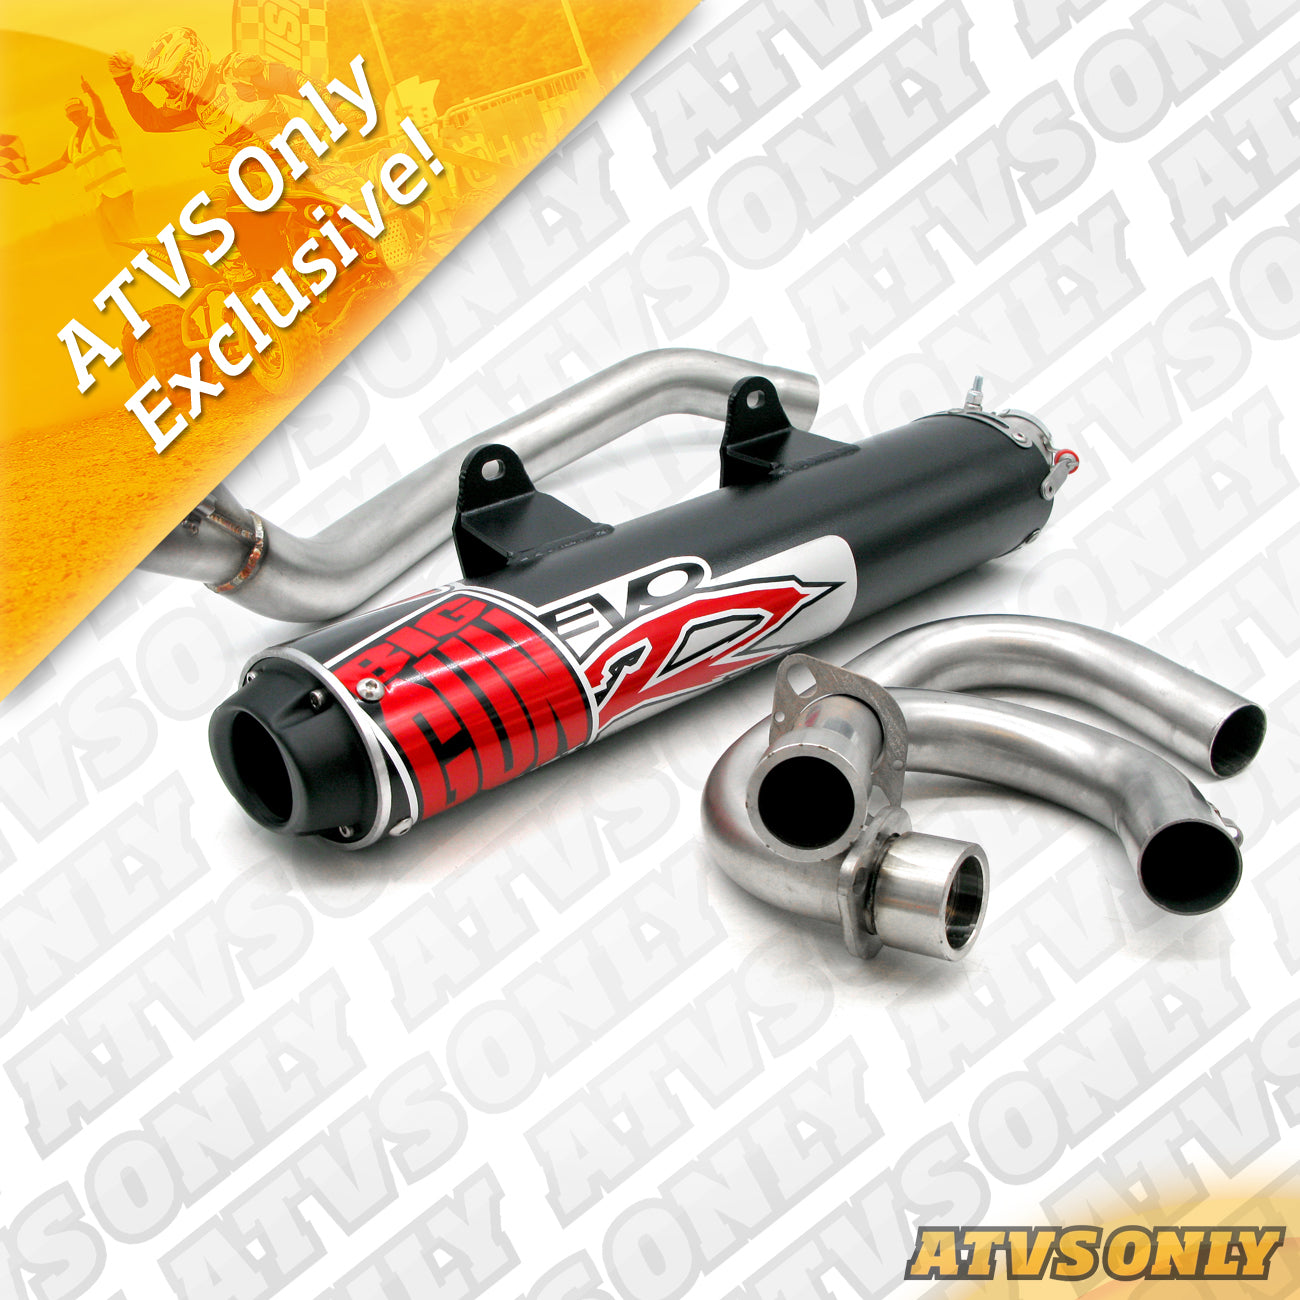 Exhaust – EVO R Full Exhaust System in Black for Yamaha Applications